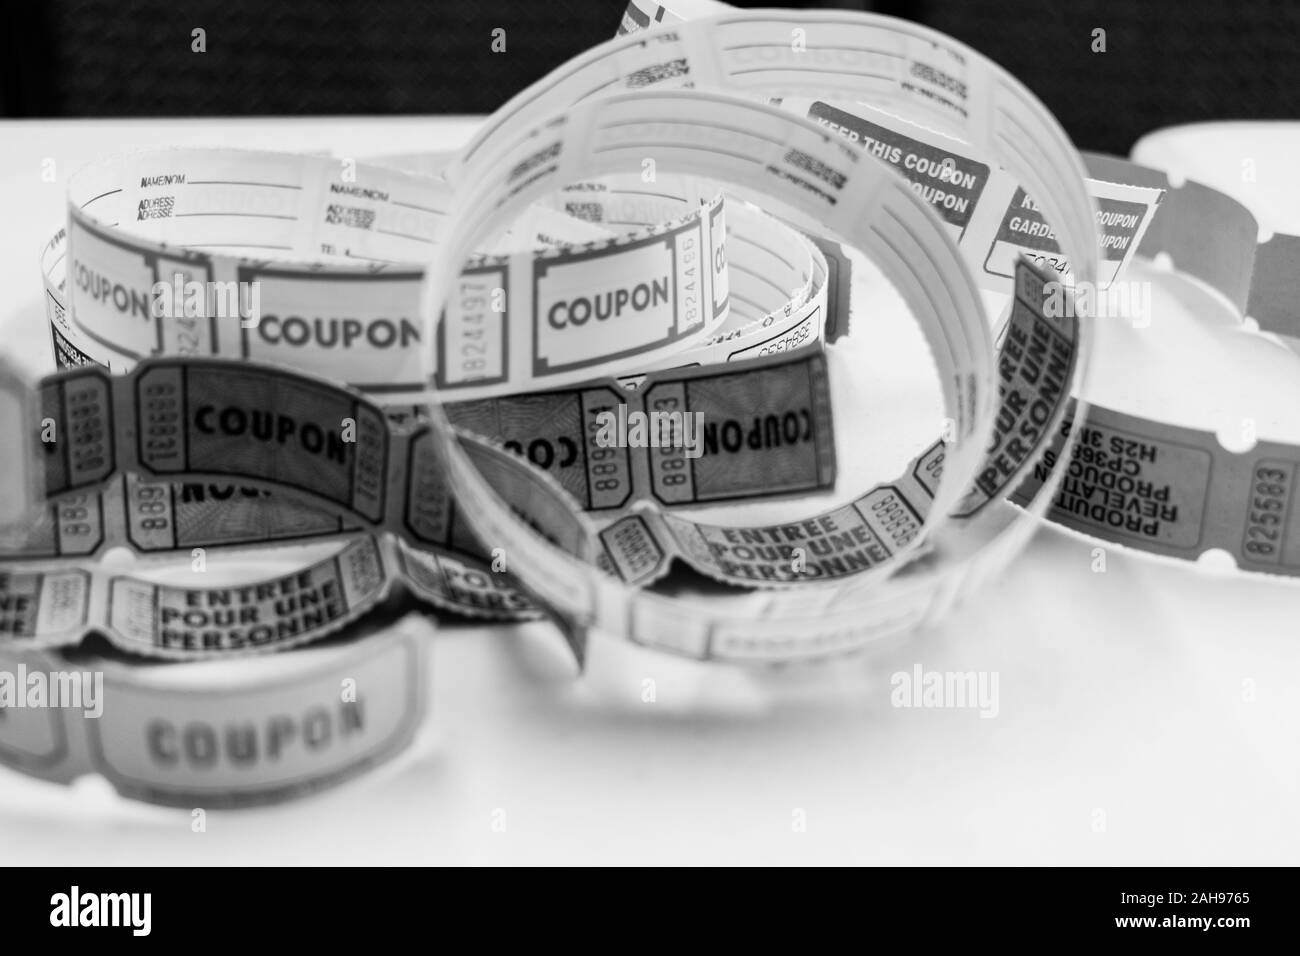 Black and white photo of unrolled raffle tickets Stock Photo